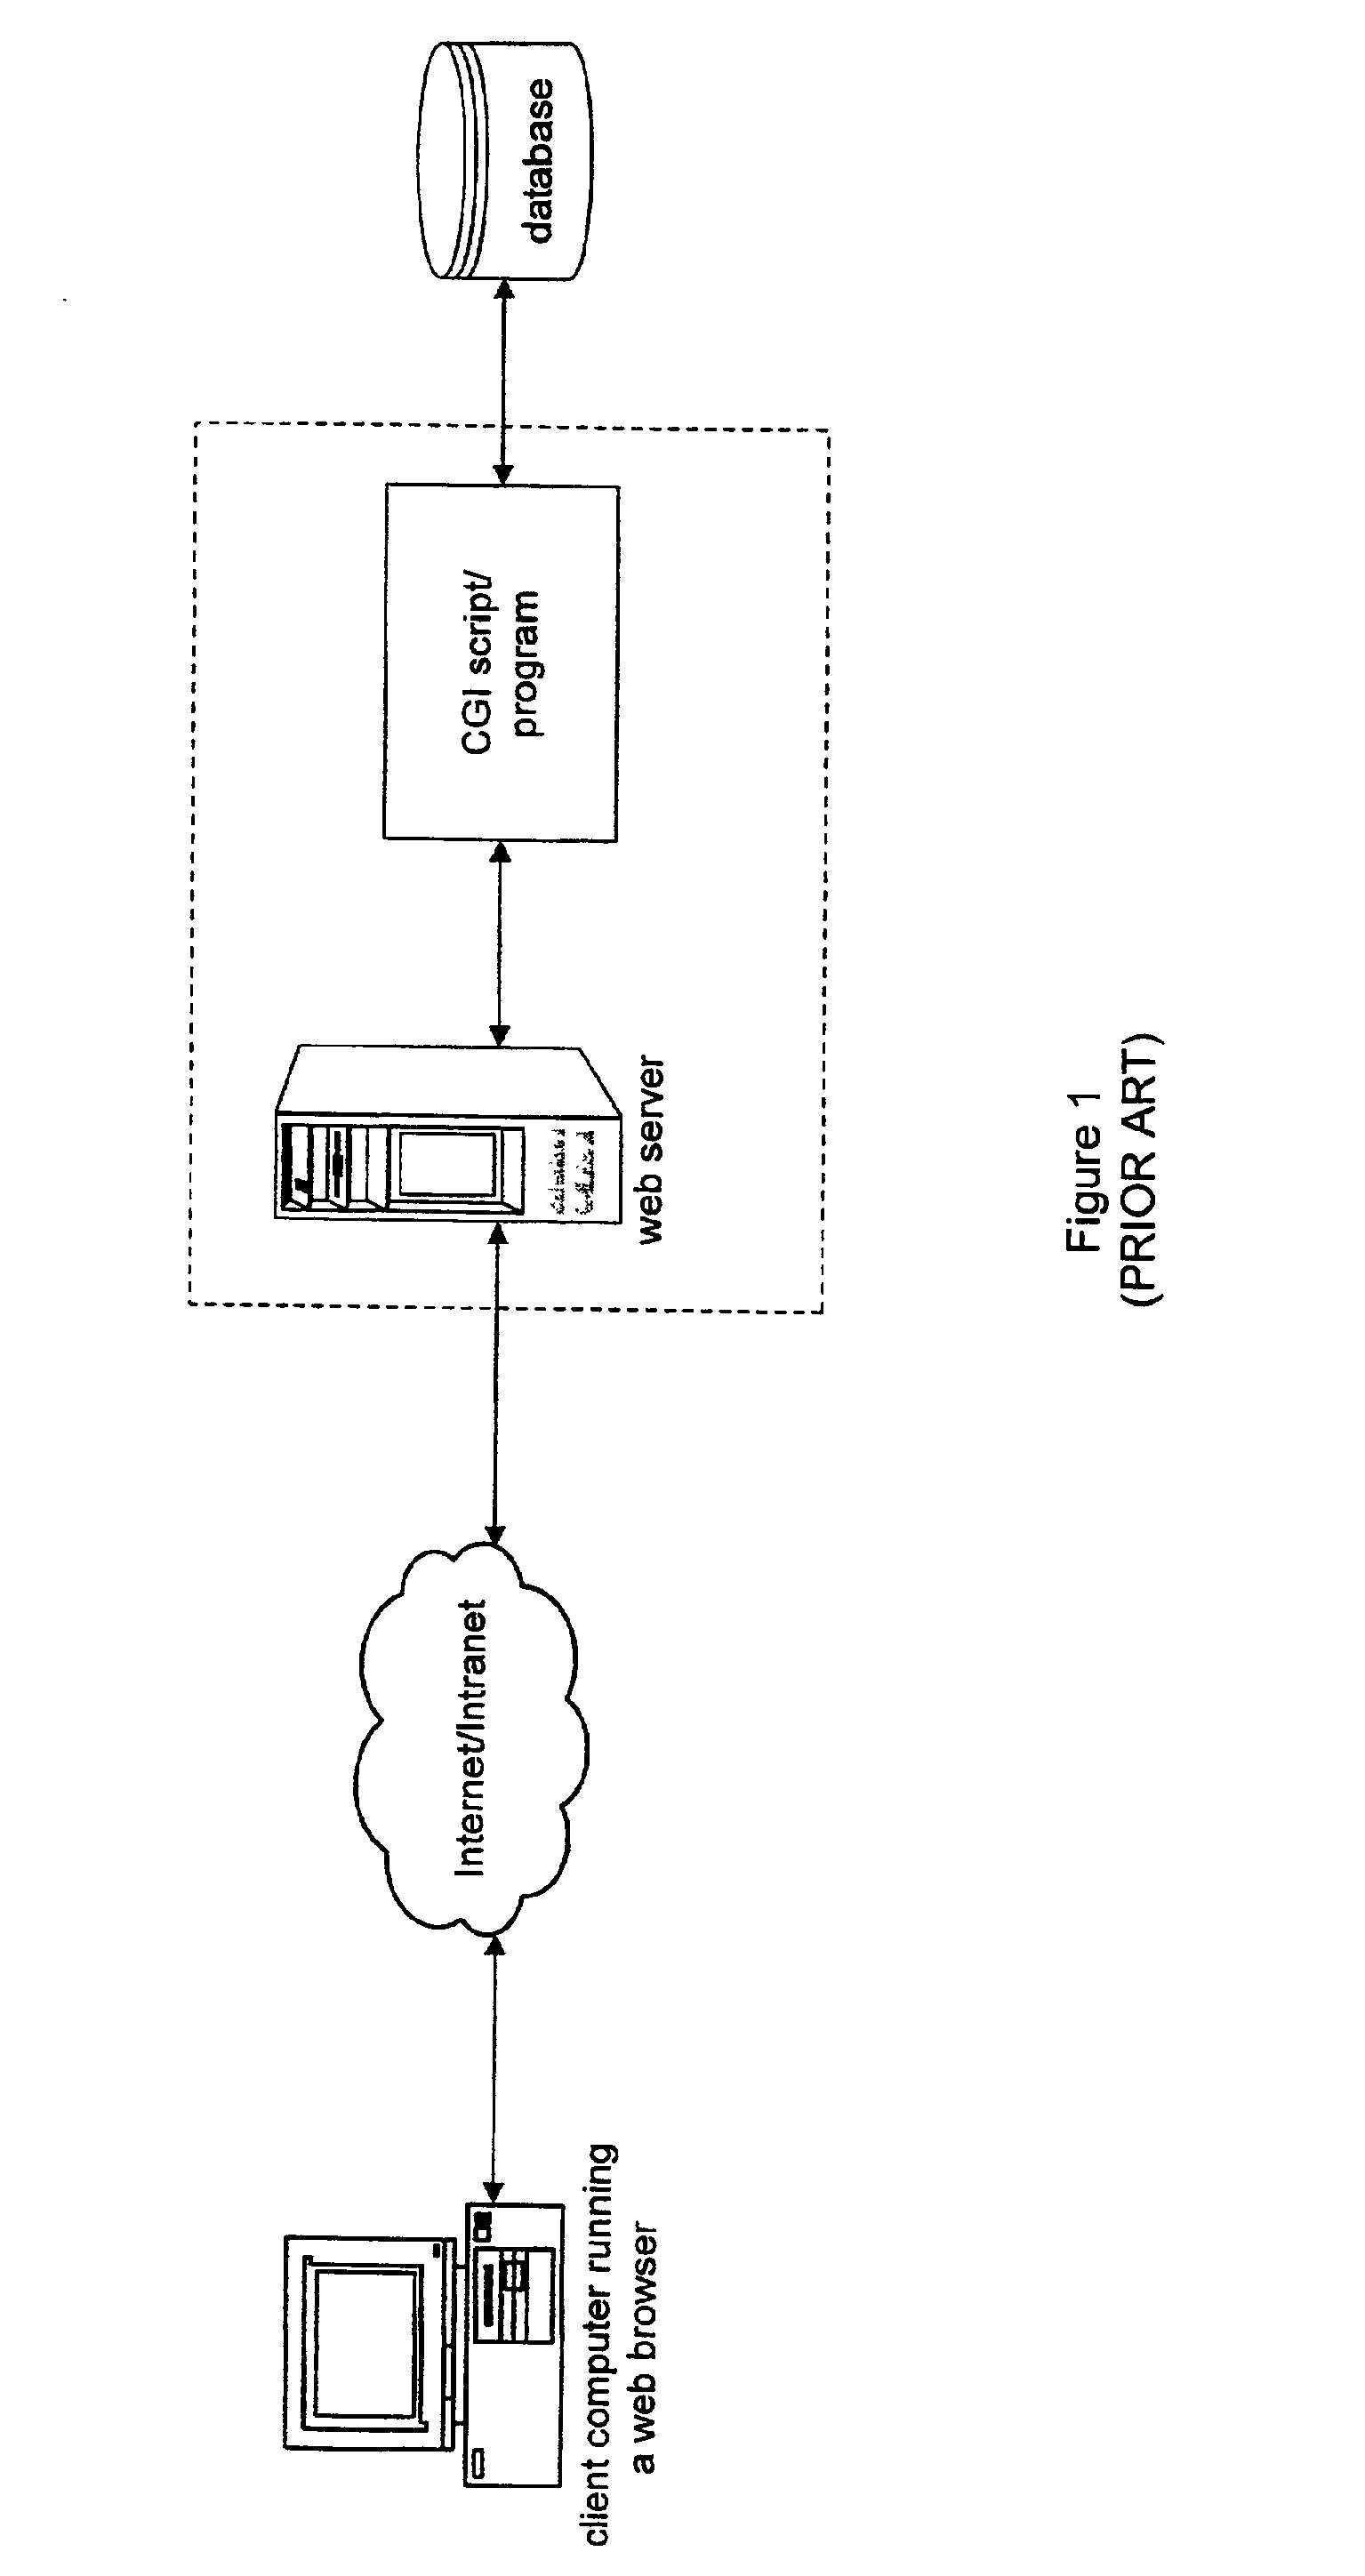 System and method for enabling application server request failover